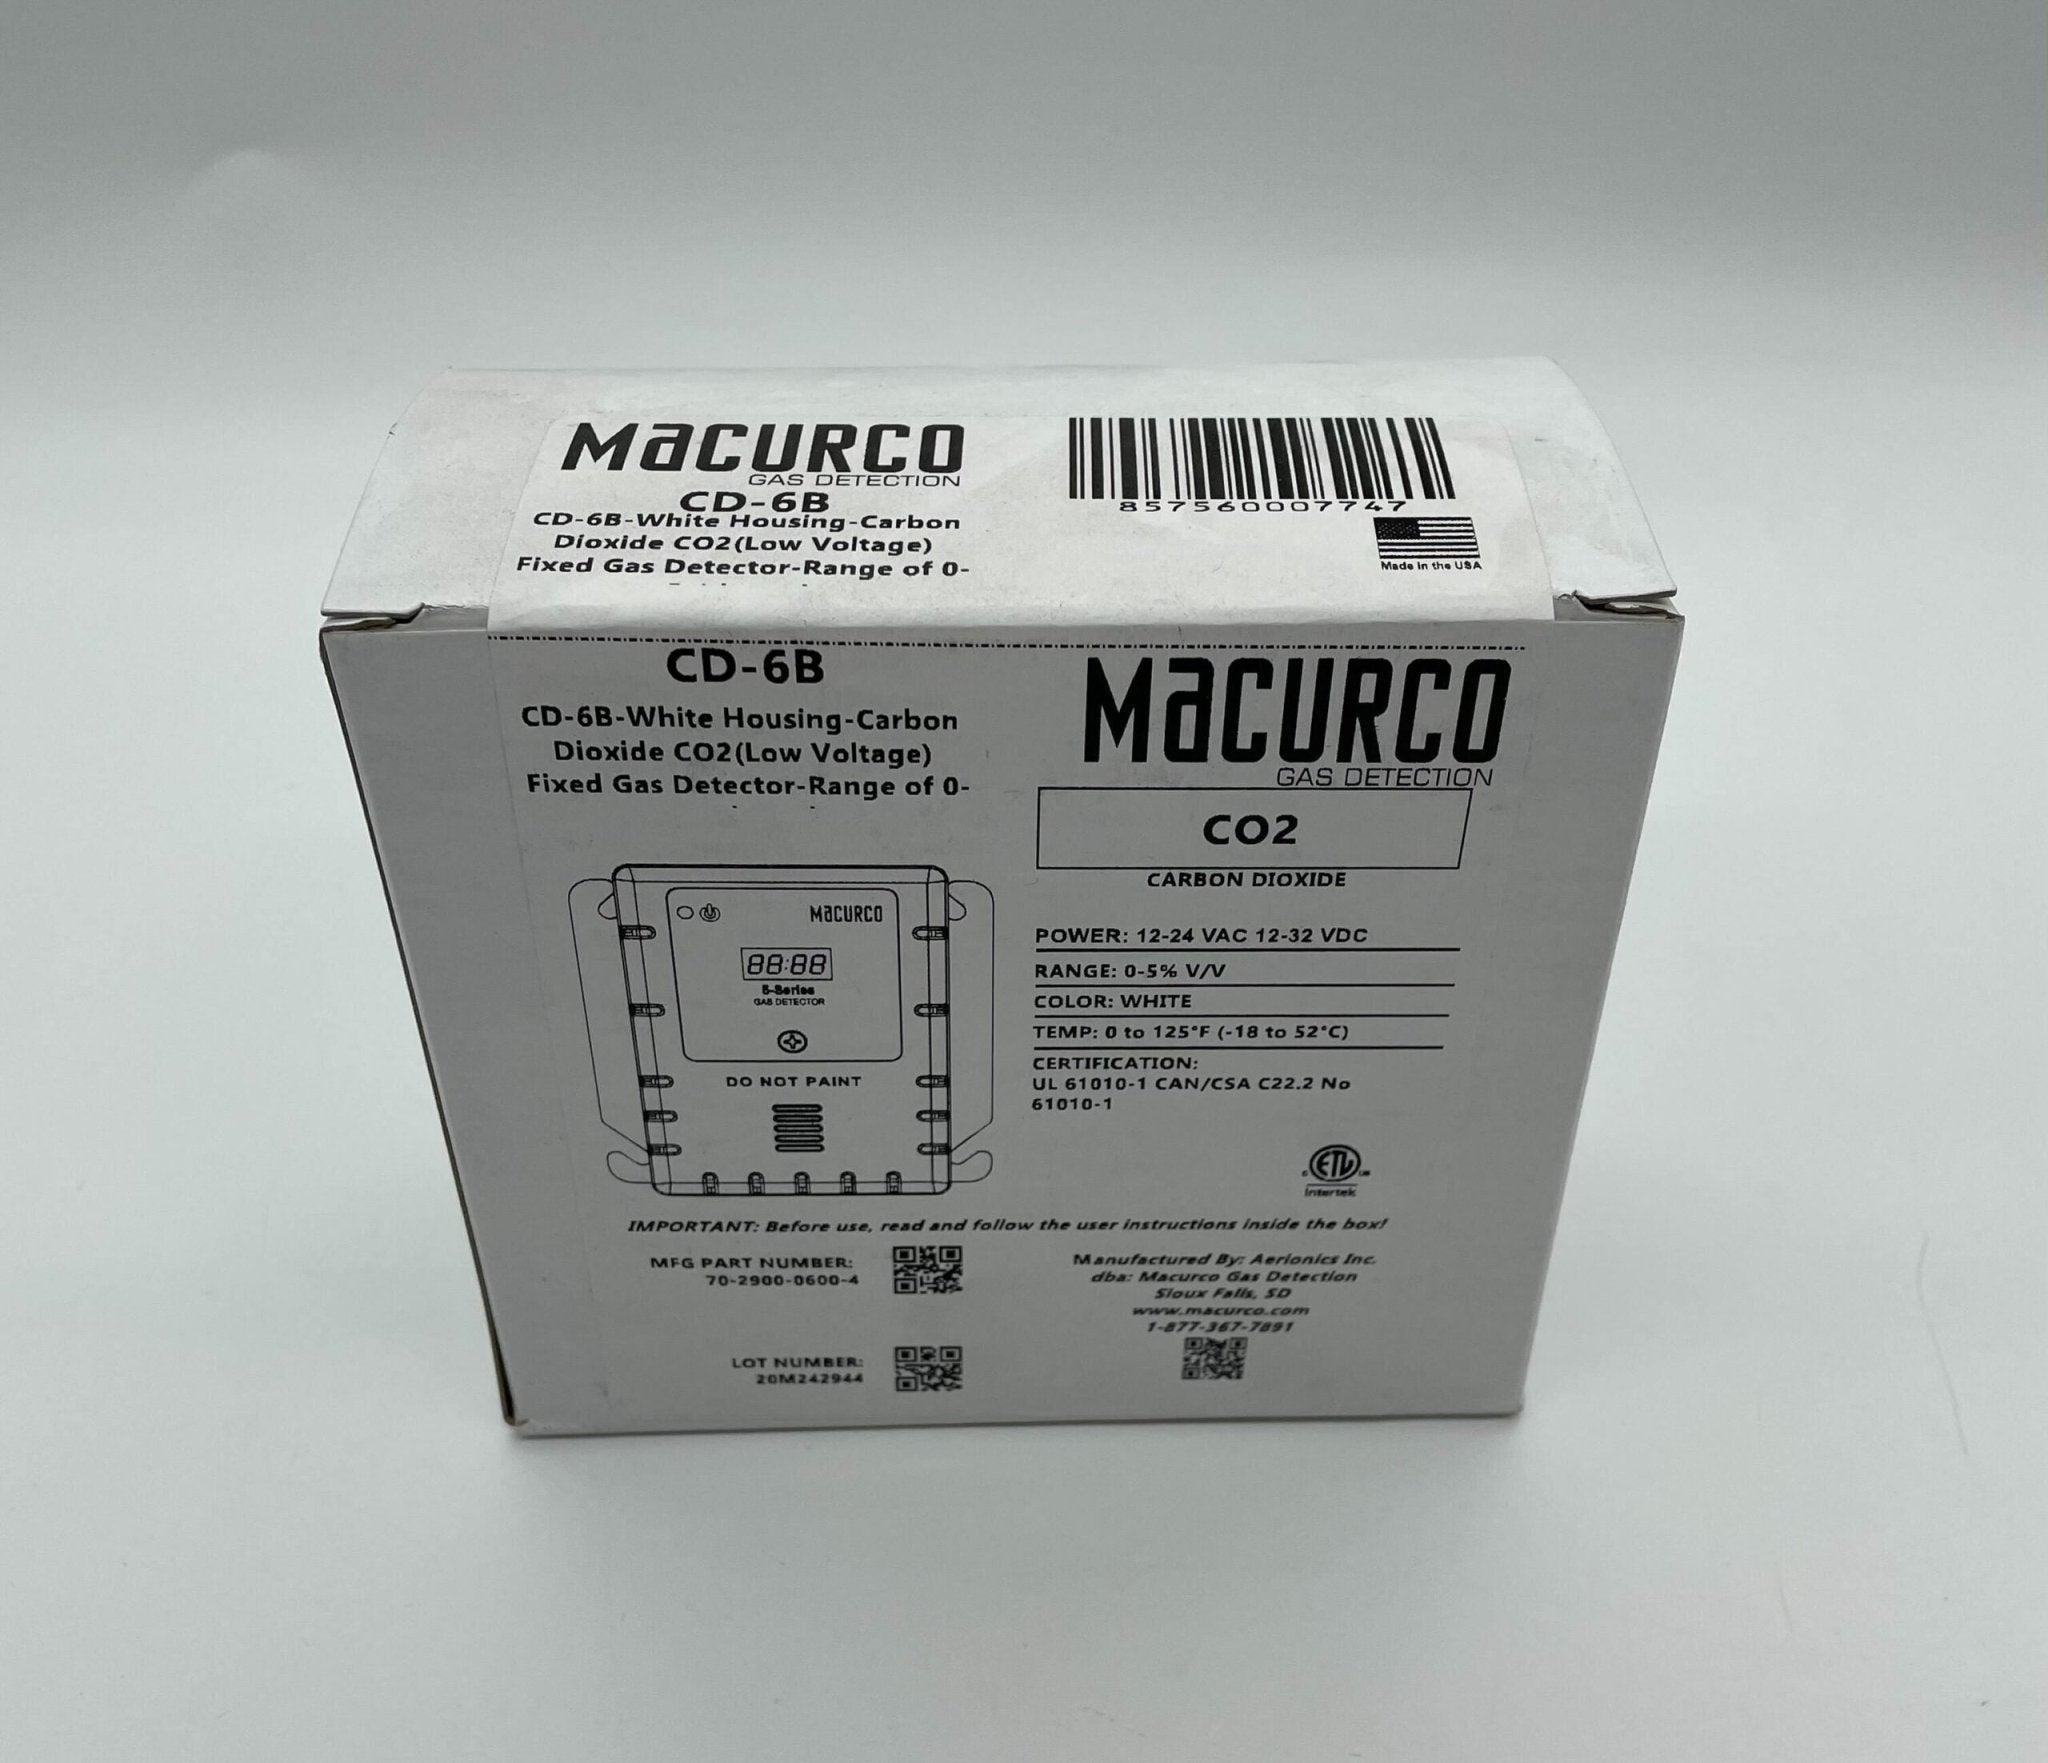 Macurco CD-6B Carbon Dioxide Fixed Gas Detector Box - The Fire Alarm Supplier